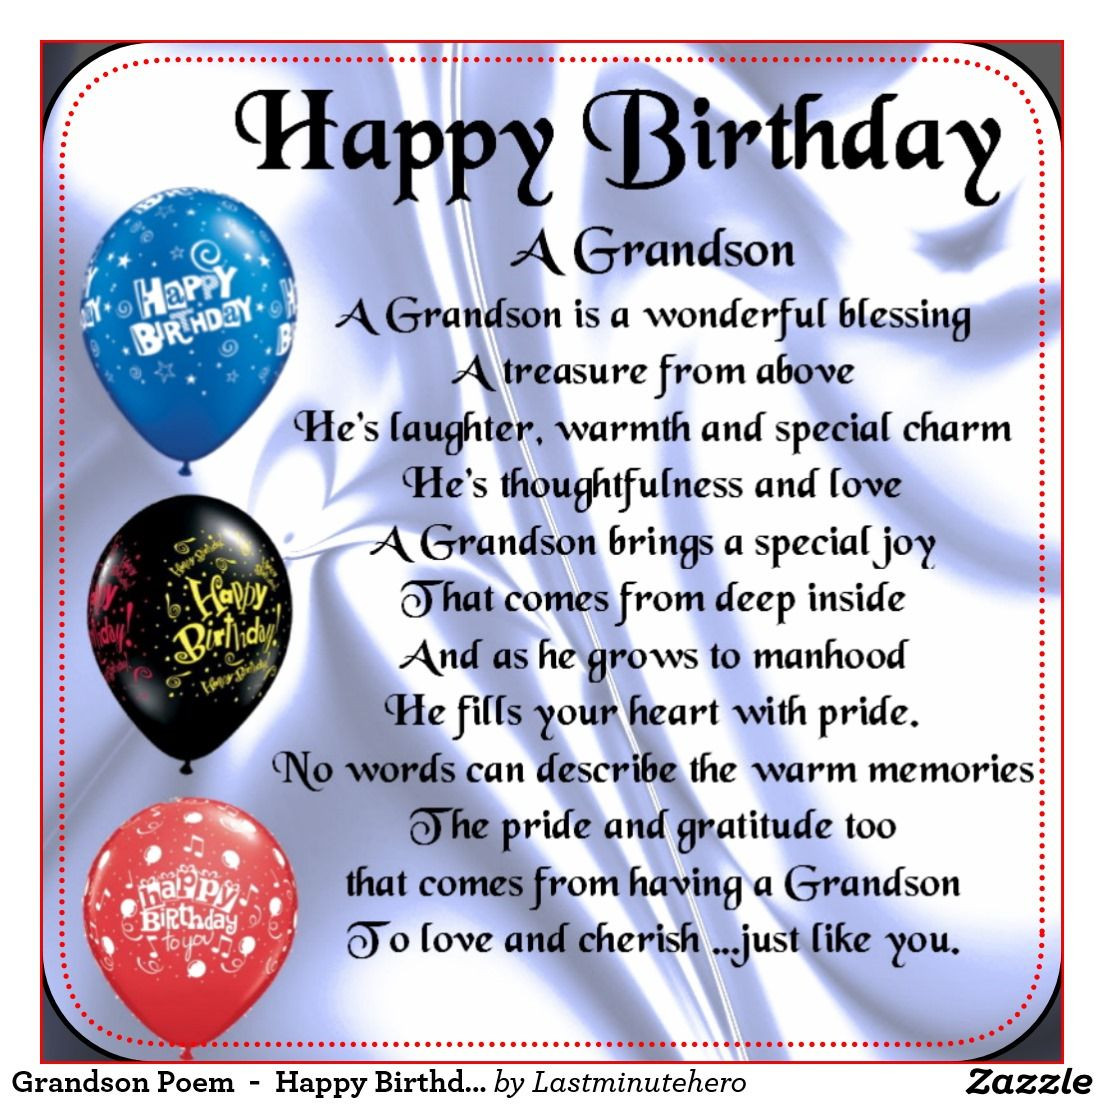 Birthday Wishes Grandson
 Pin by mary mata on BIRTHDAY DAY CARDS